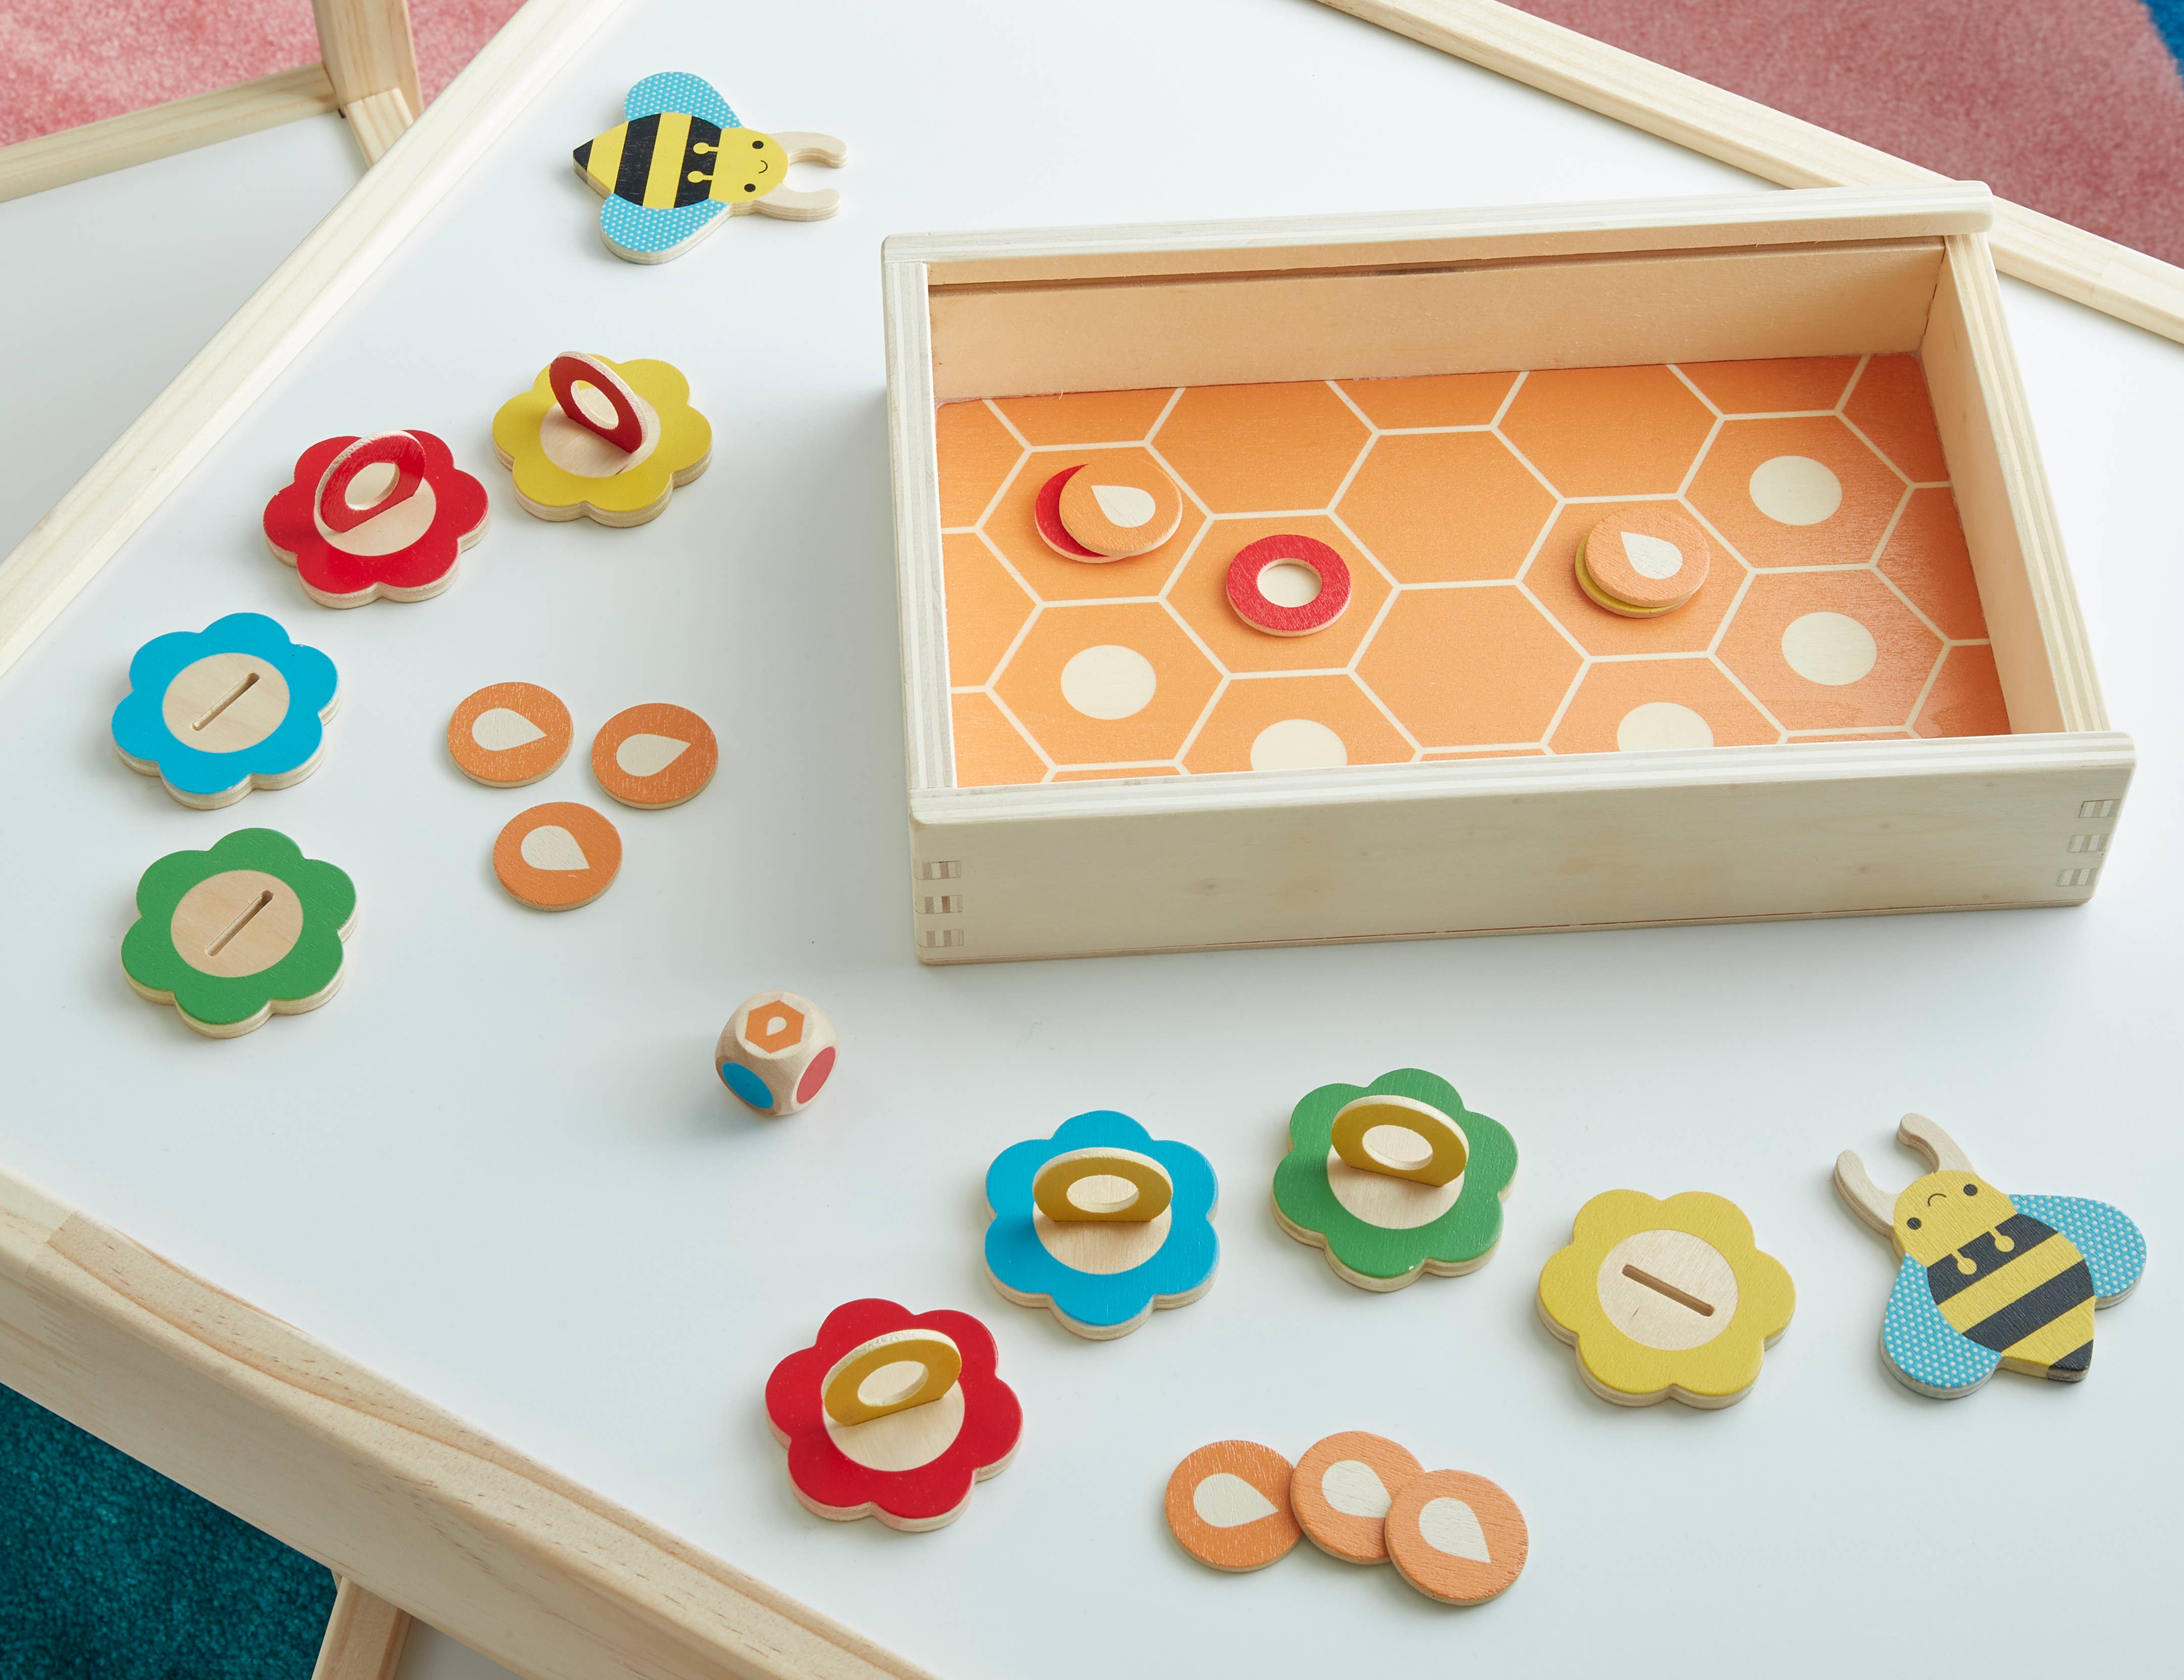 Save the Bees Wooden Game